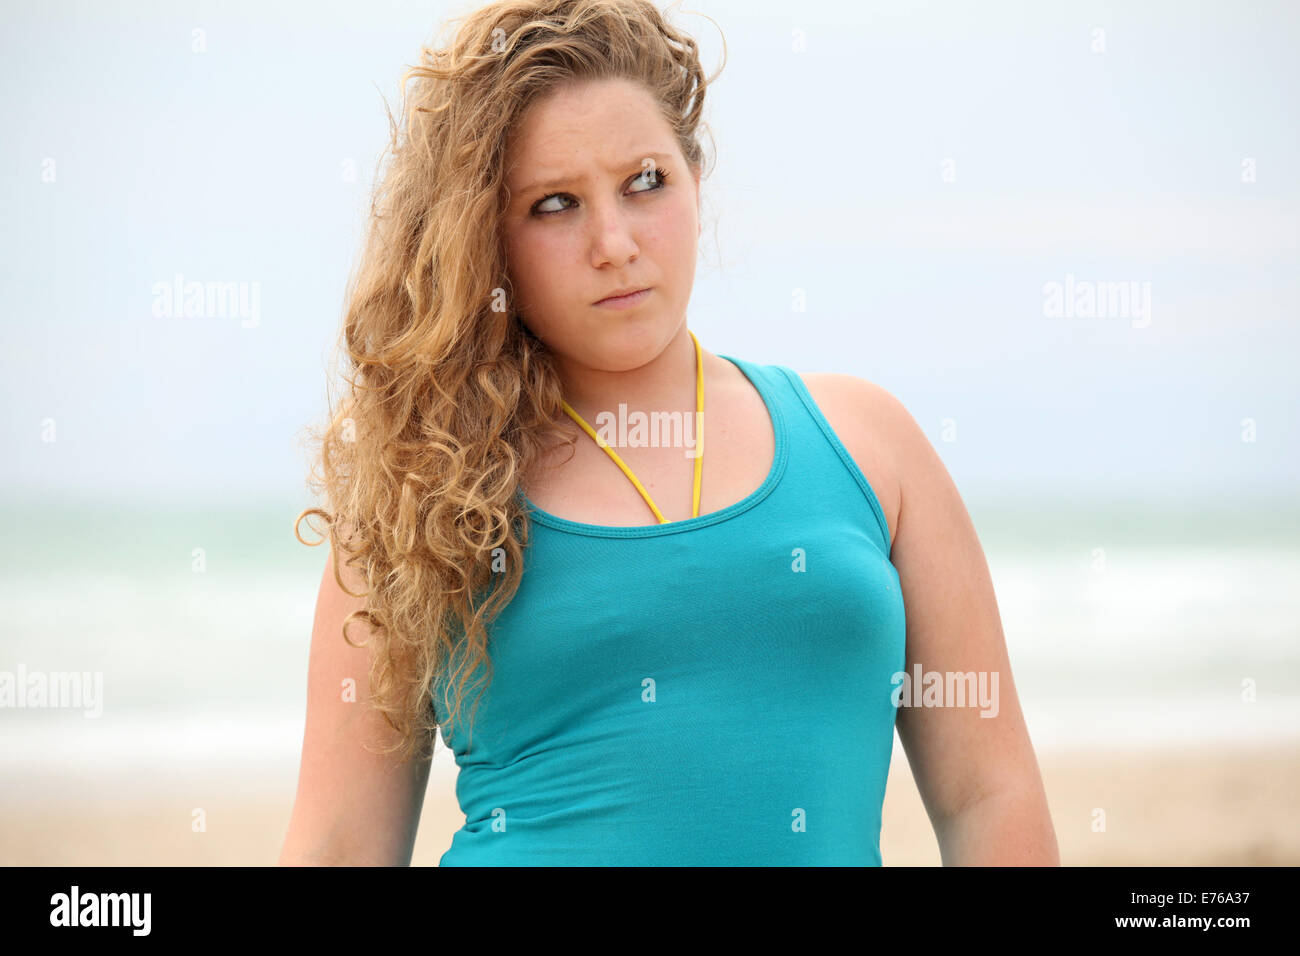 Portrait of a 16 yesr old teen girl Model released Stock Photo